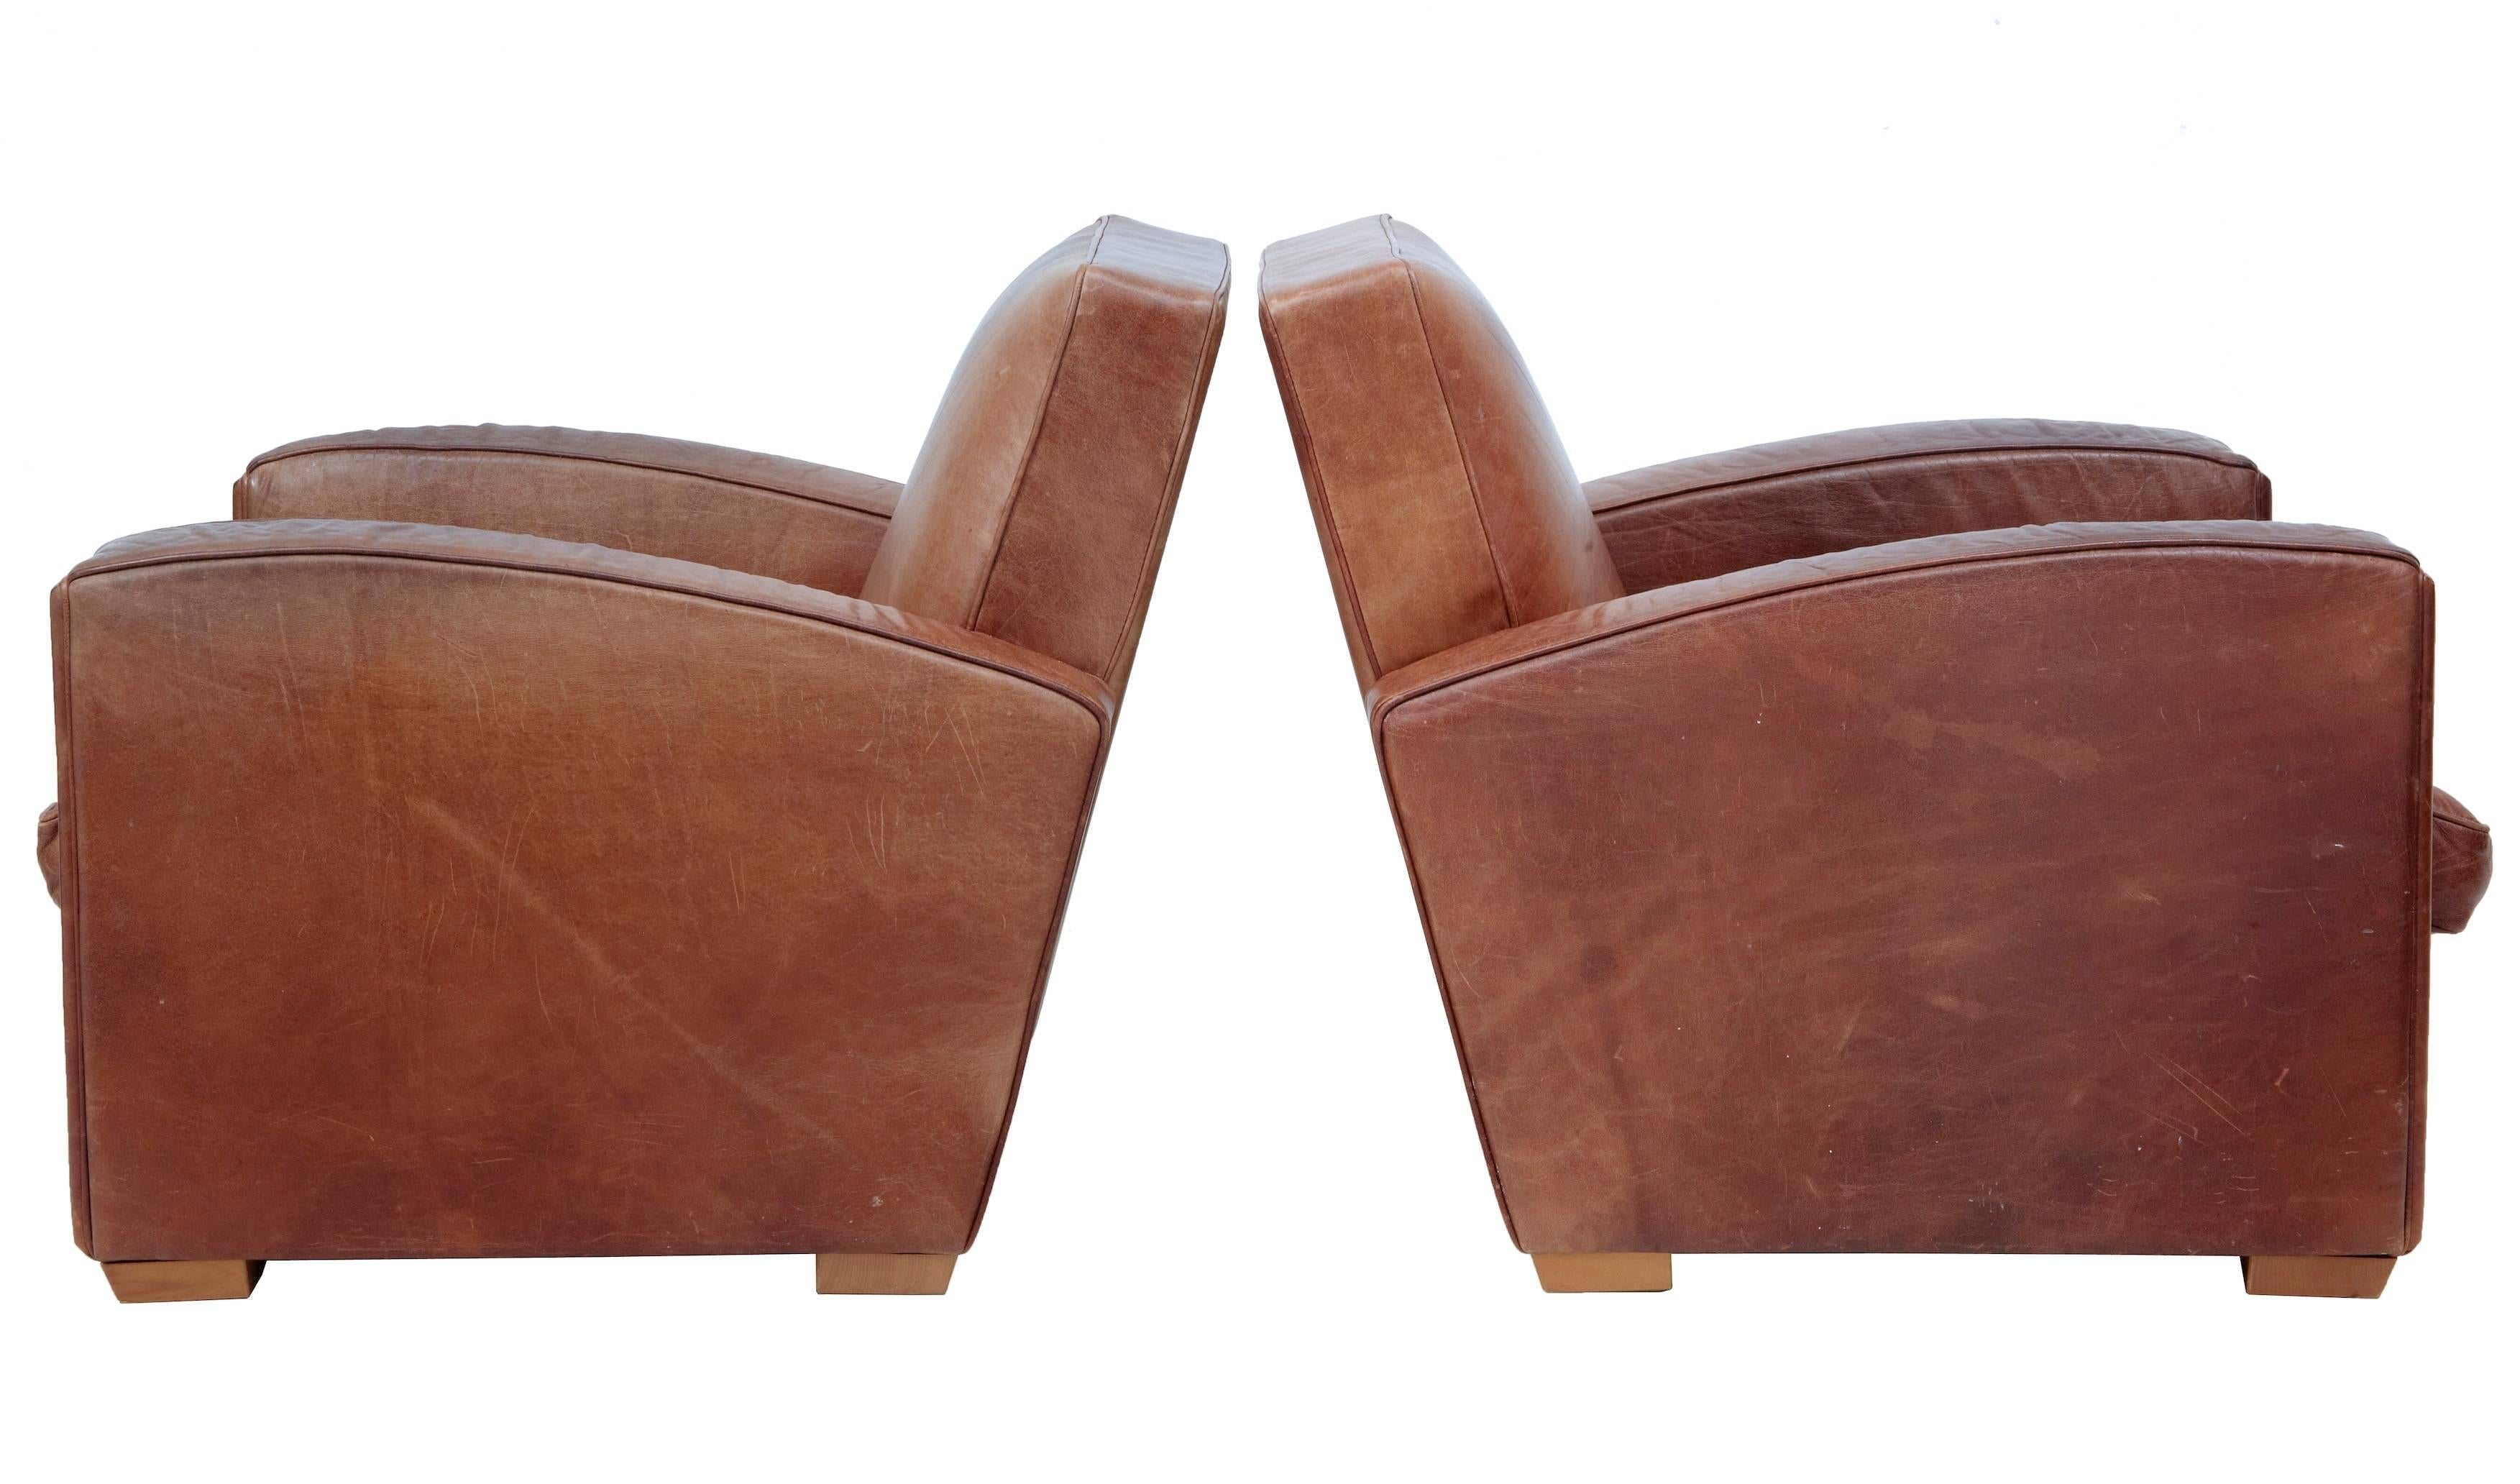 Pair of typical shape Art Deco influenced club armchairs from the late 1960s.
Upholstered in good quality brown leather.
Some staining to the back rests and the odd mark, otherwise in good condition.
Standing on block feet.

Measures: Height 30